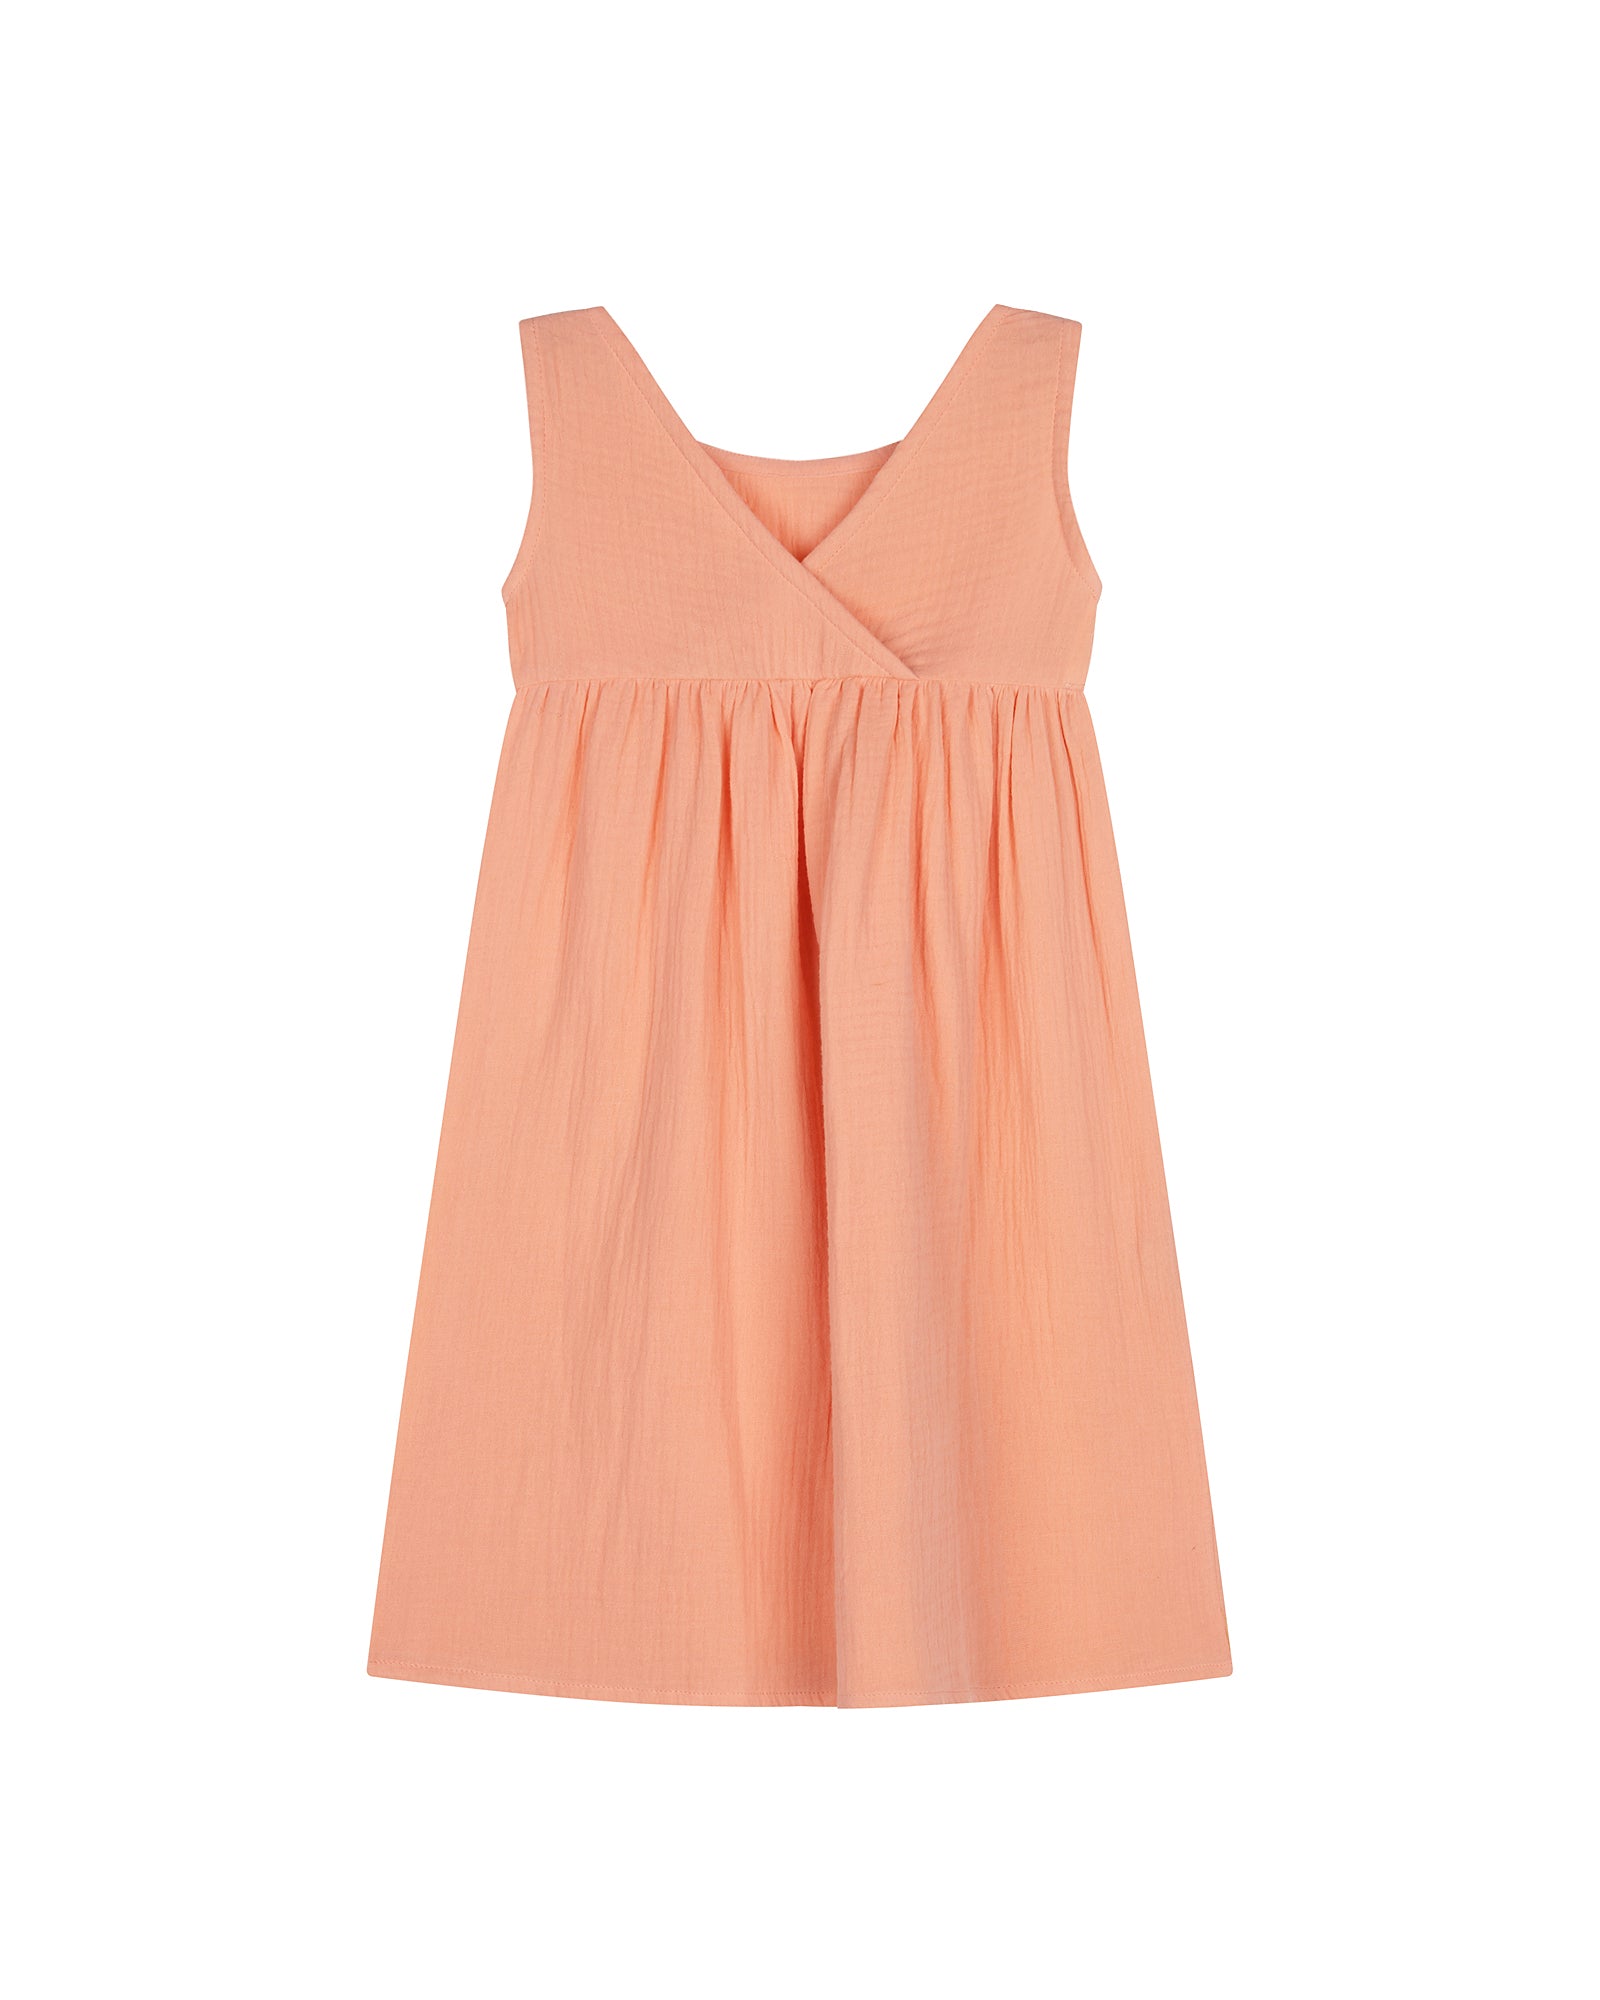 Everyday Dress - Coral Pink